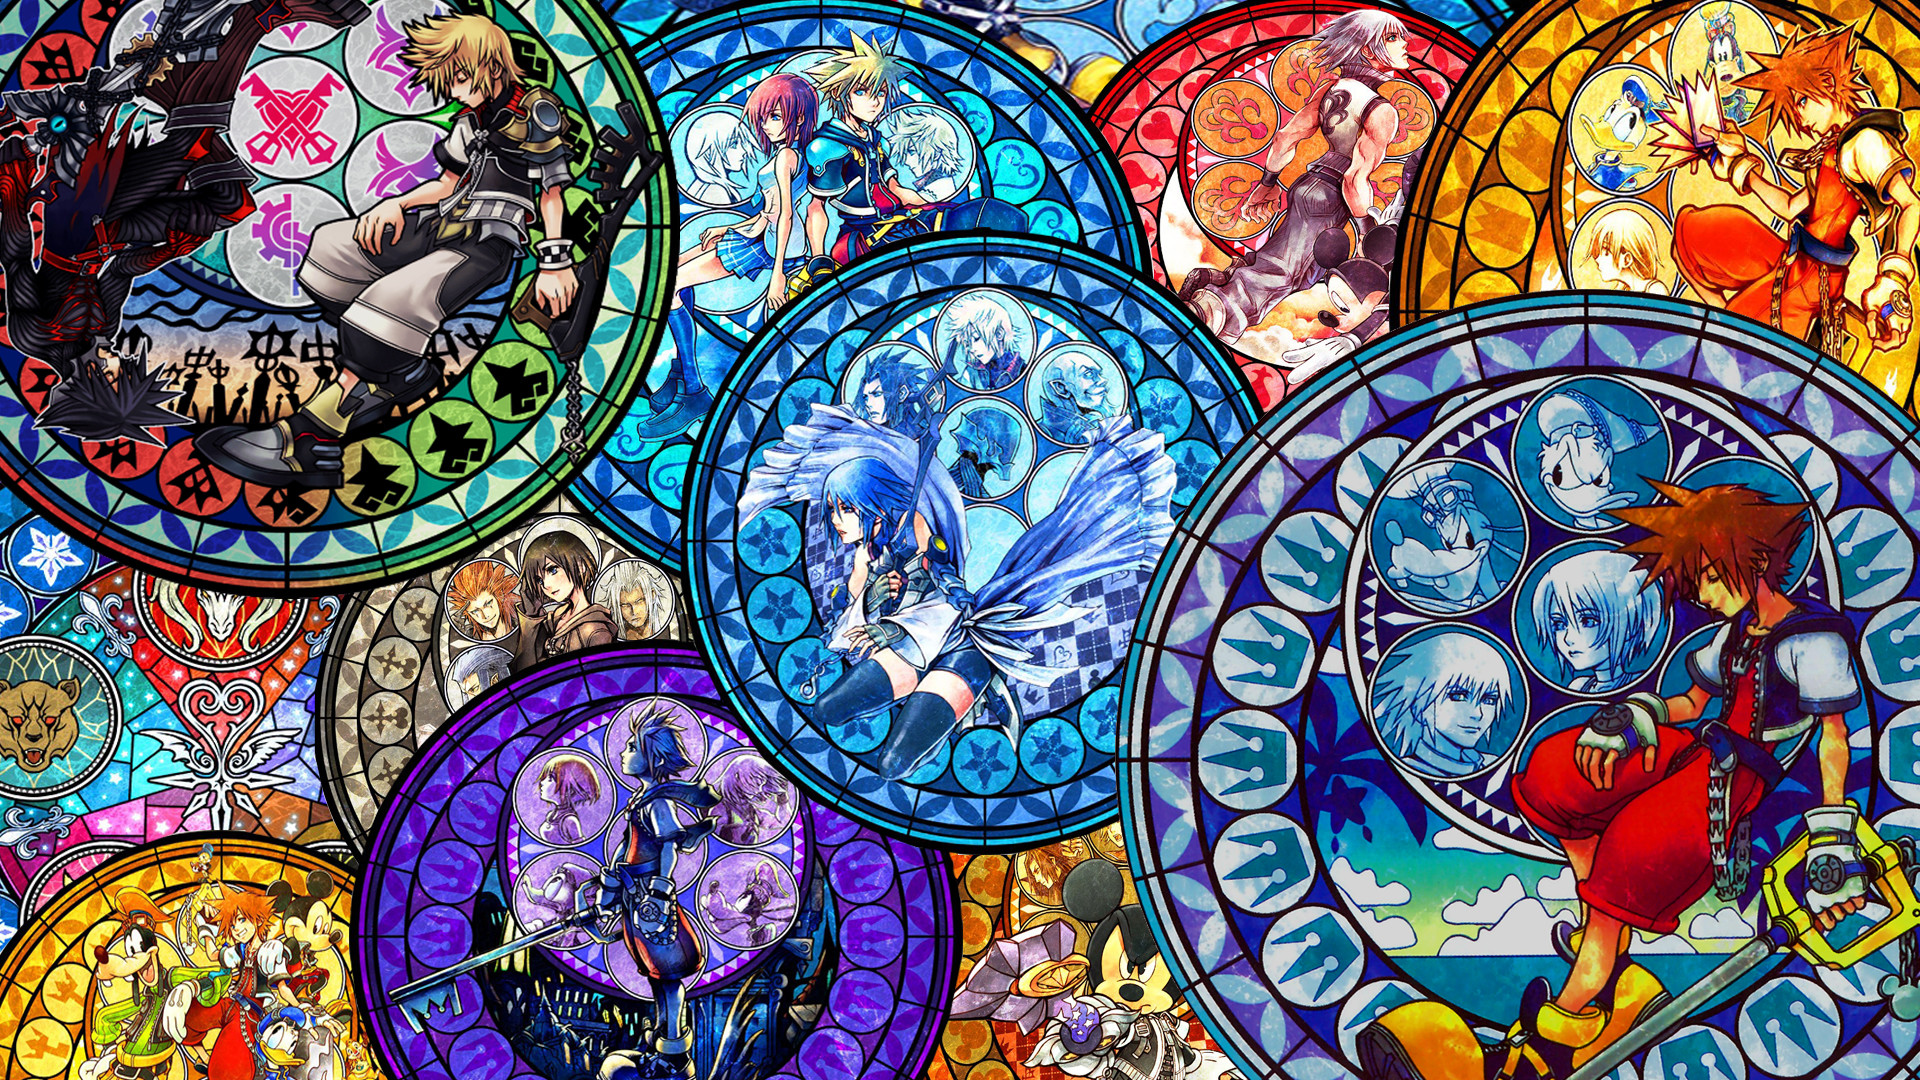 1920x1080, Kingdom Hearts Stained Glass Wallpaper By - Kingdom Hearts Wallpaper Stained Glass - HD Wallpaper 